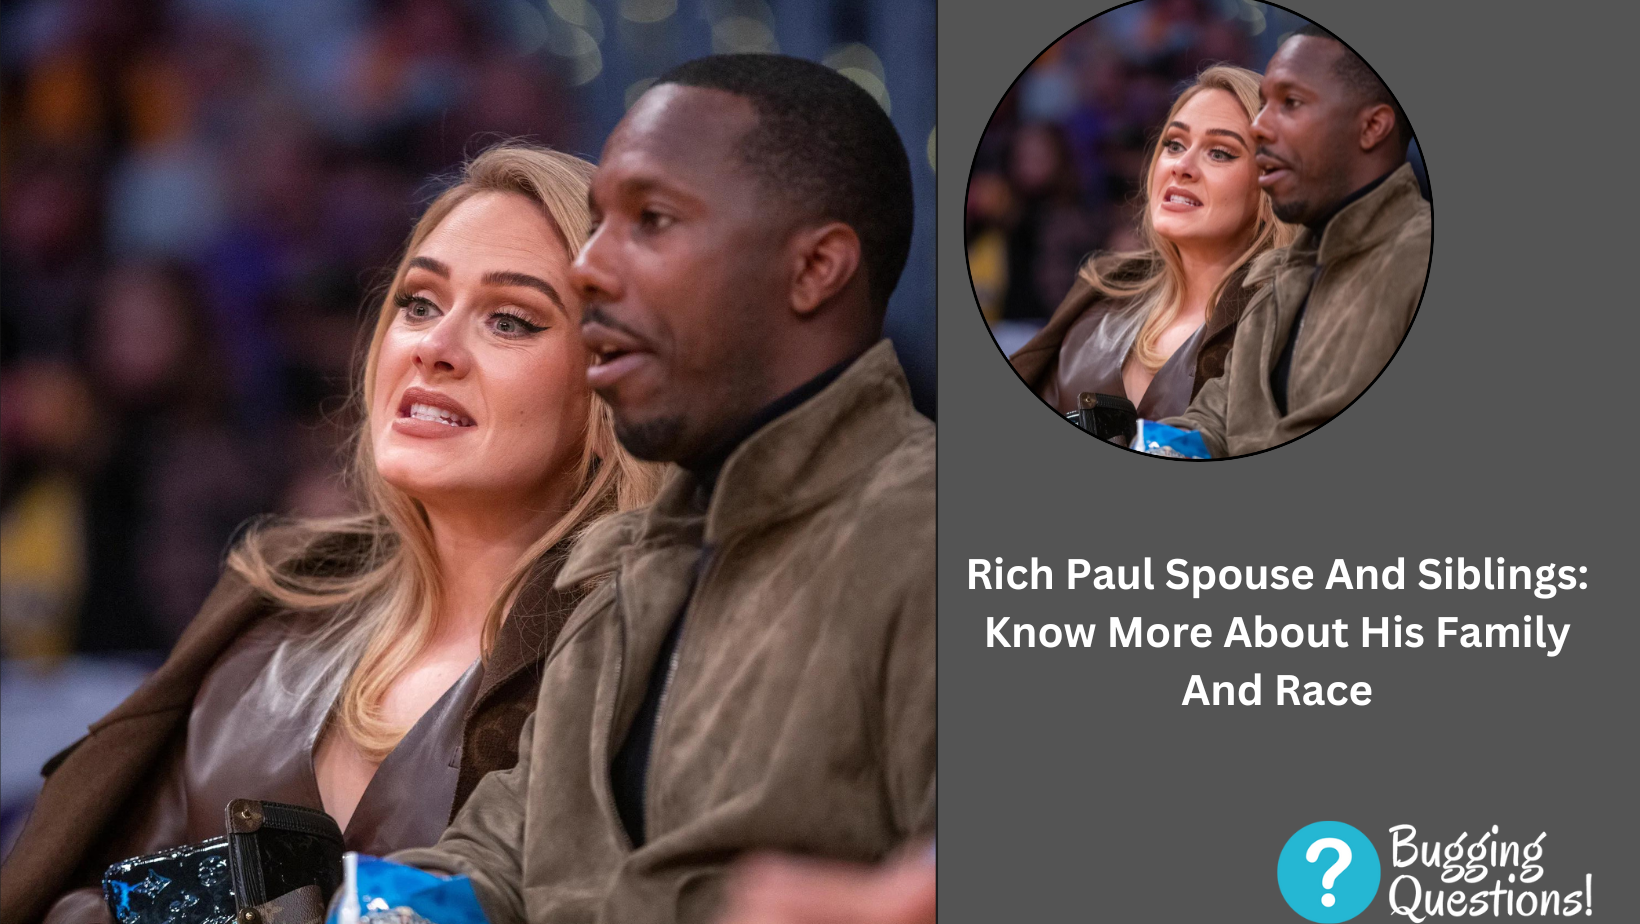 Rich Paul Spouse And Siblings